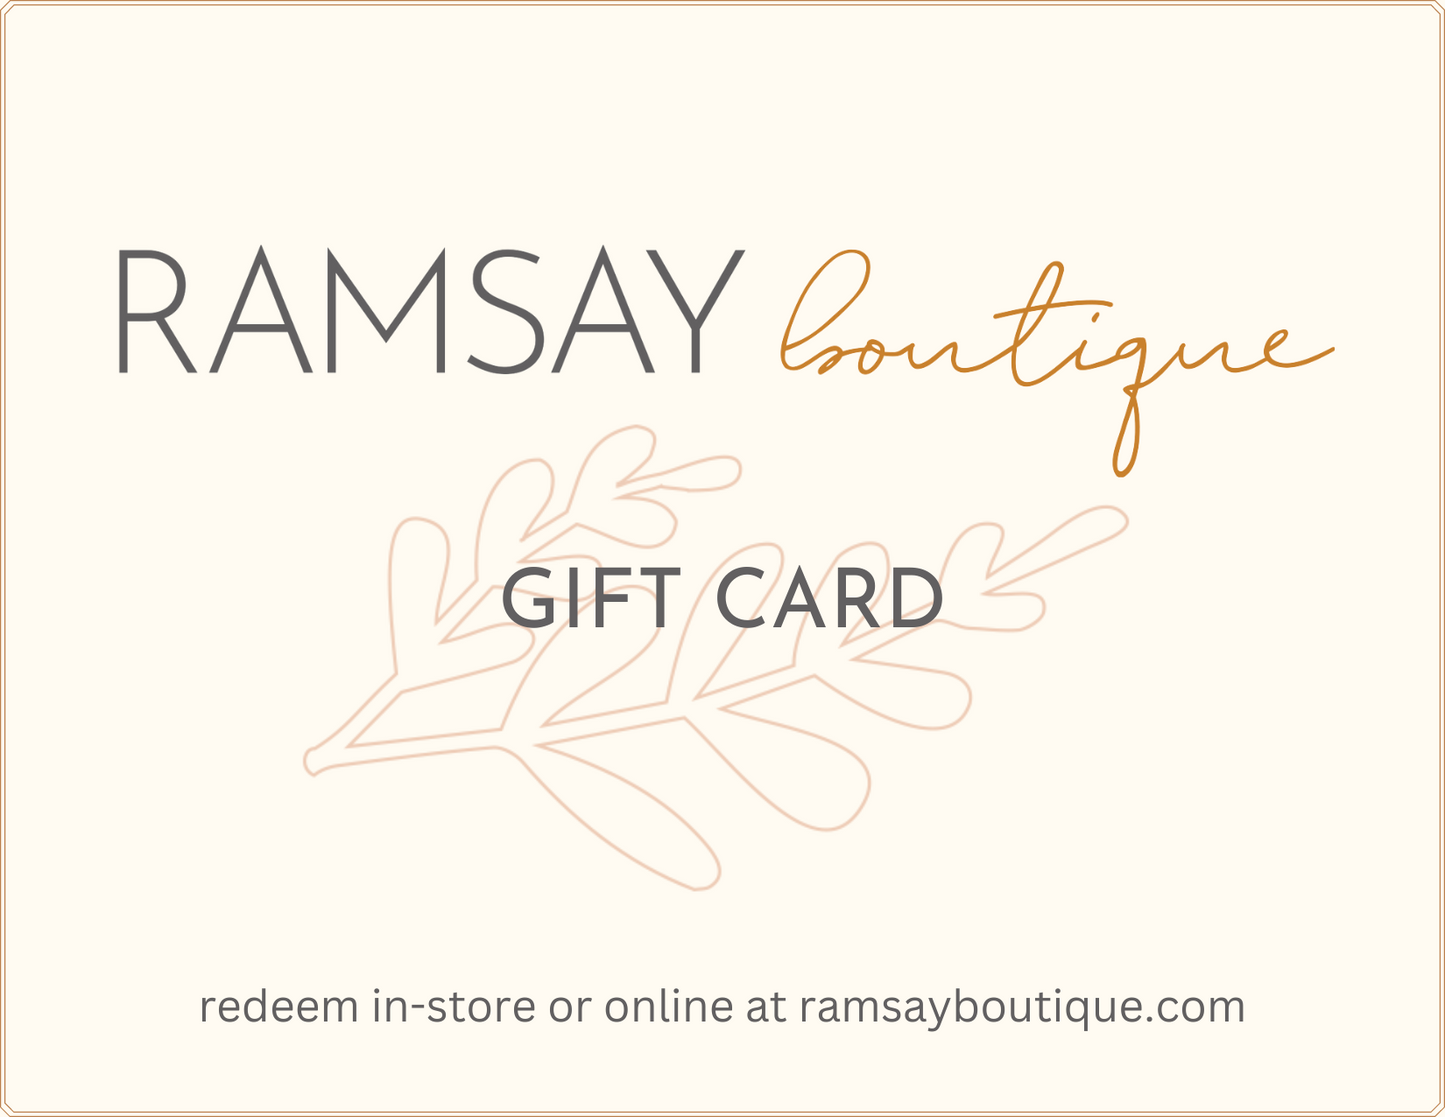 Ramsay Boutique Gift Card